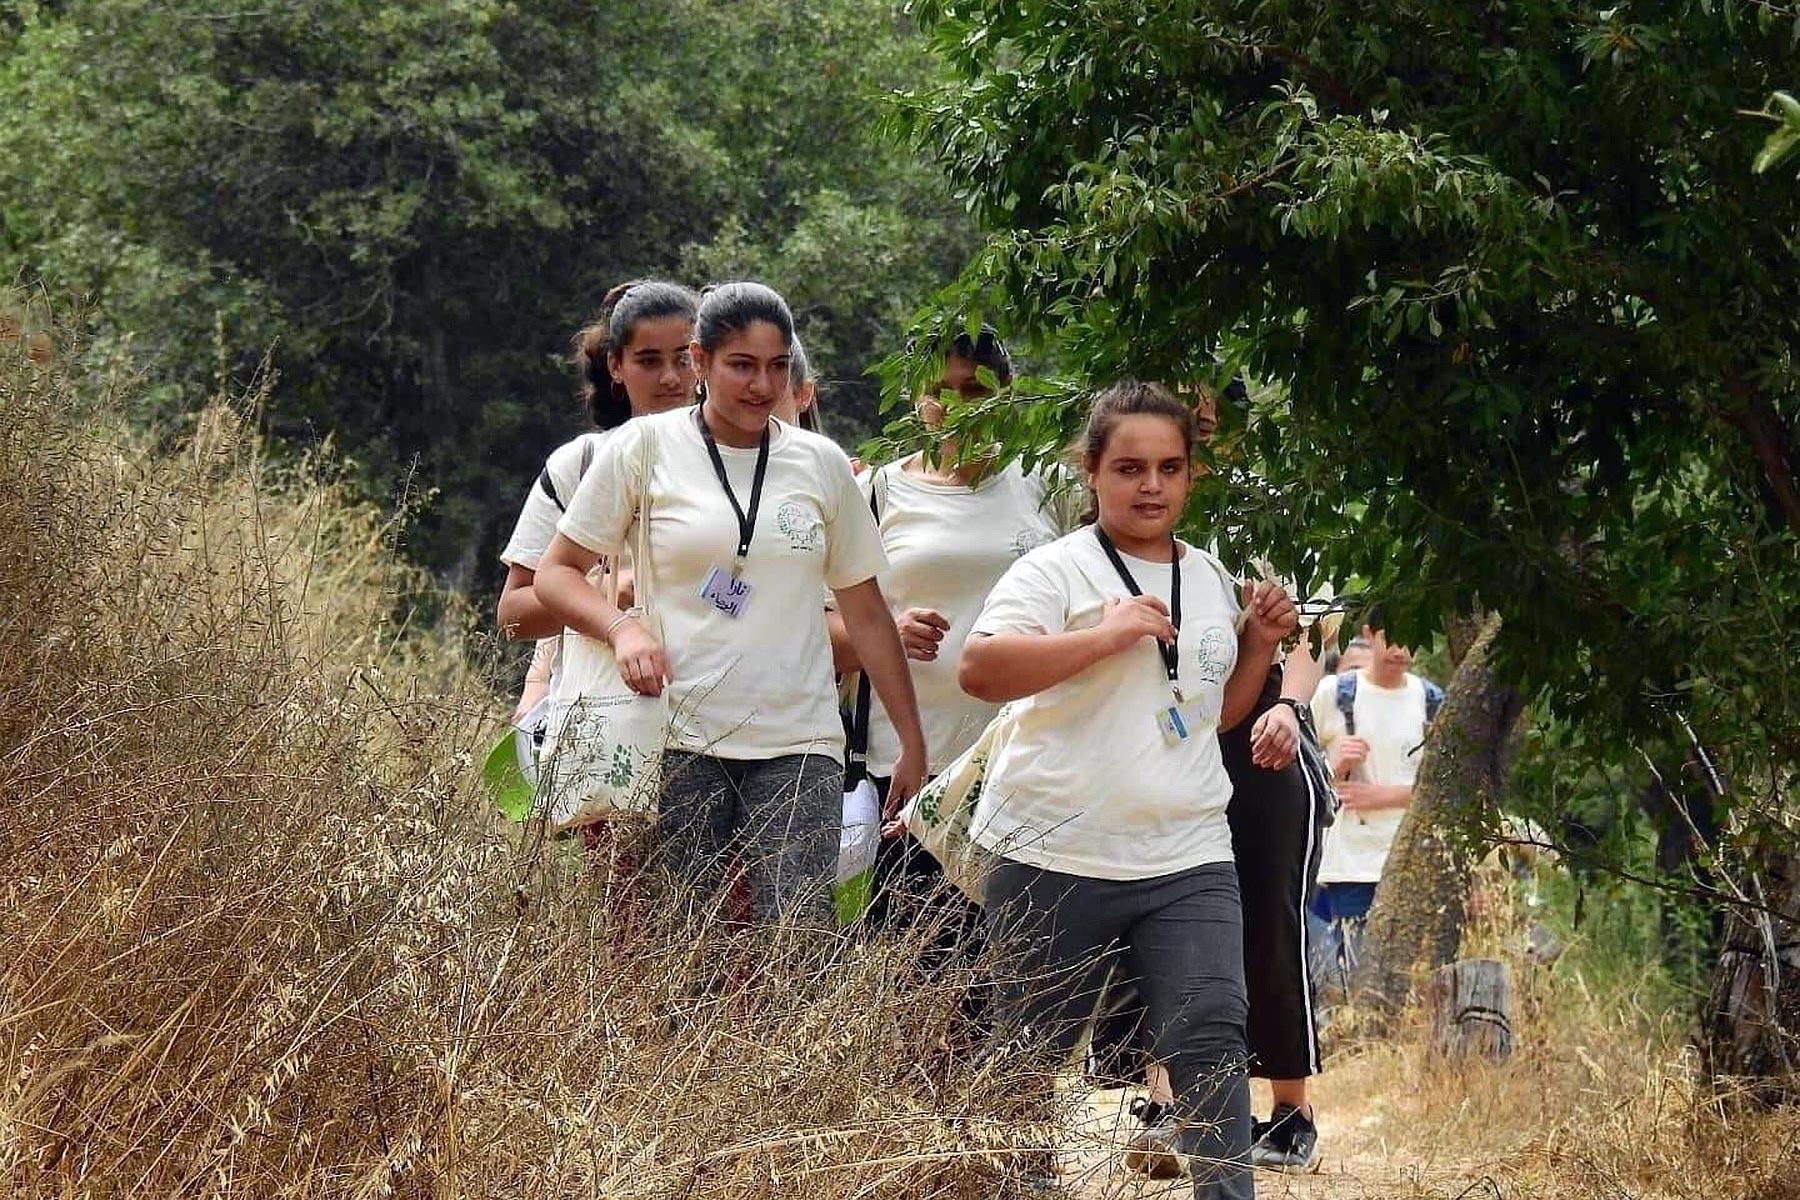 Students from schools in the West Bank take part in a training workshop on environmental leadership. Photo: Adrainne Gray